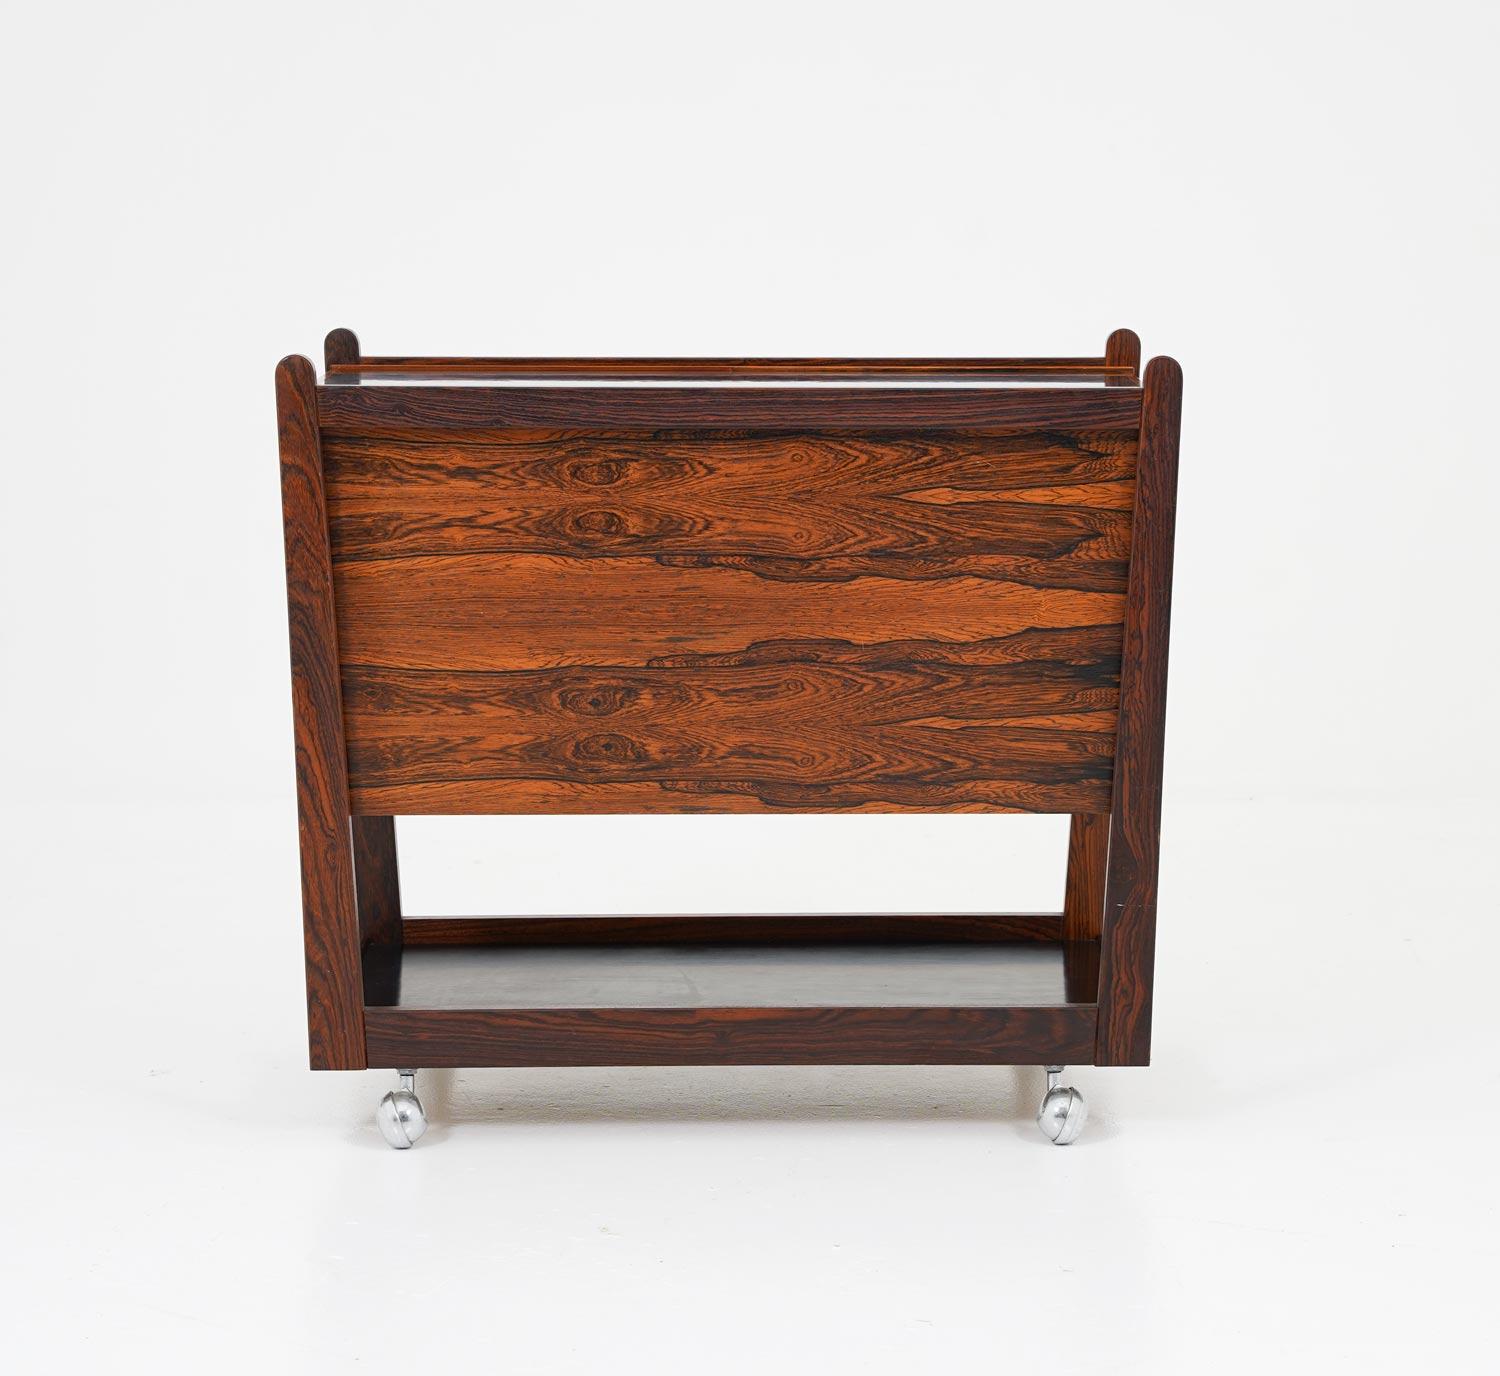 Bar cart designed by Rolf Hesland for Bagn Møbelindustri, Norway.
The bar cart has a sliding Formica top, which hides a space to store liquor and glasses. The rosewood shows an intensive grain. 

Condition: Very good original condition.